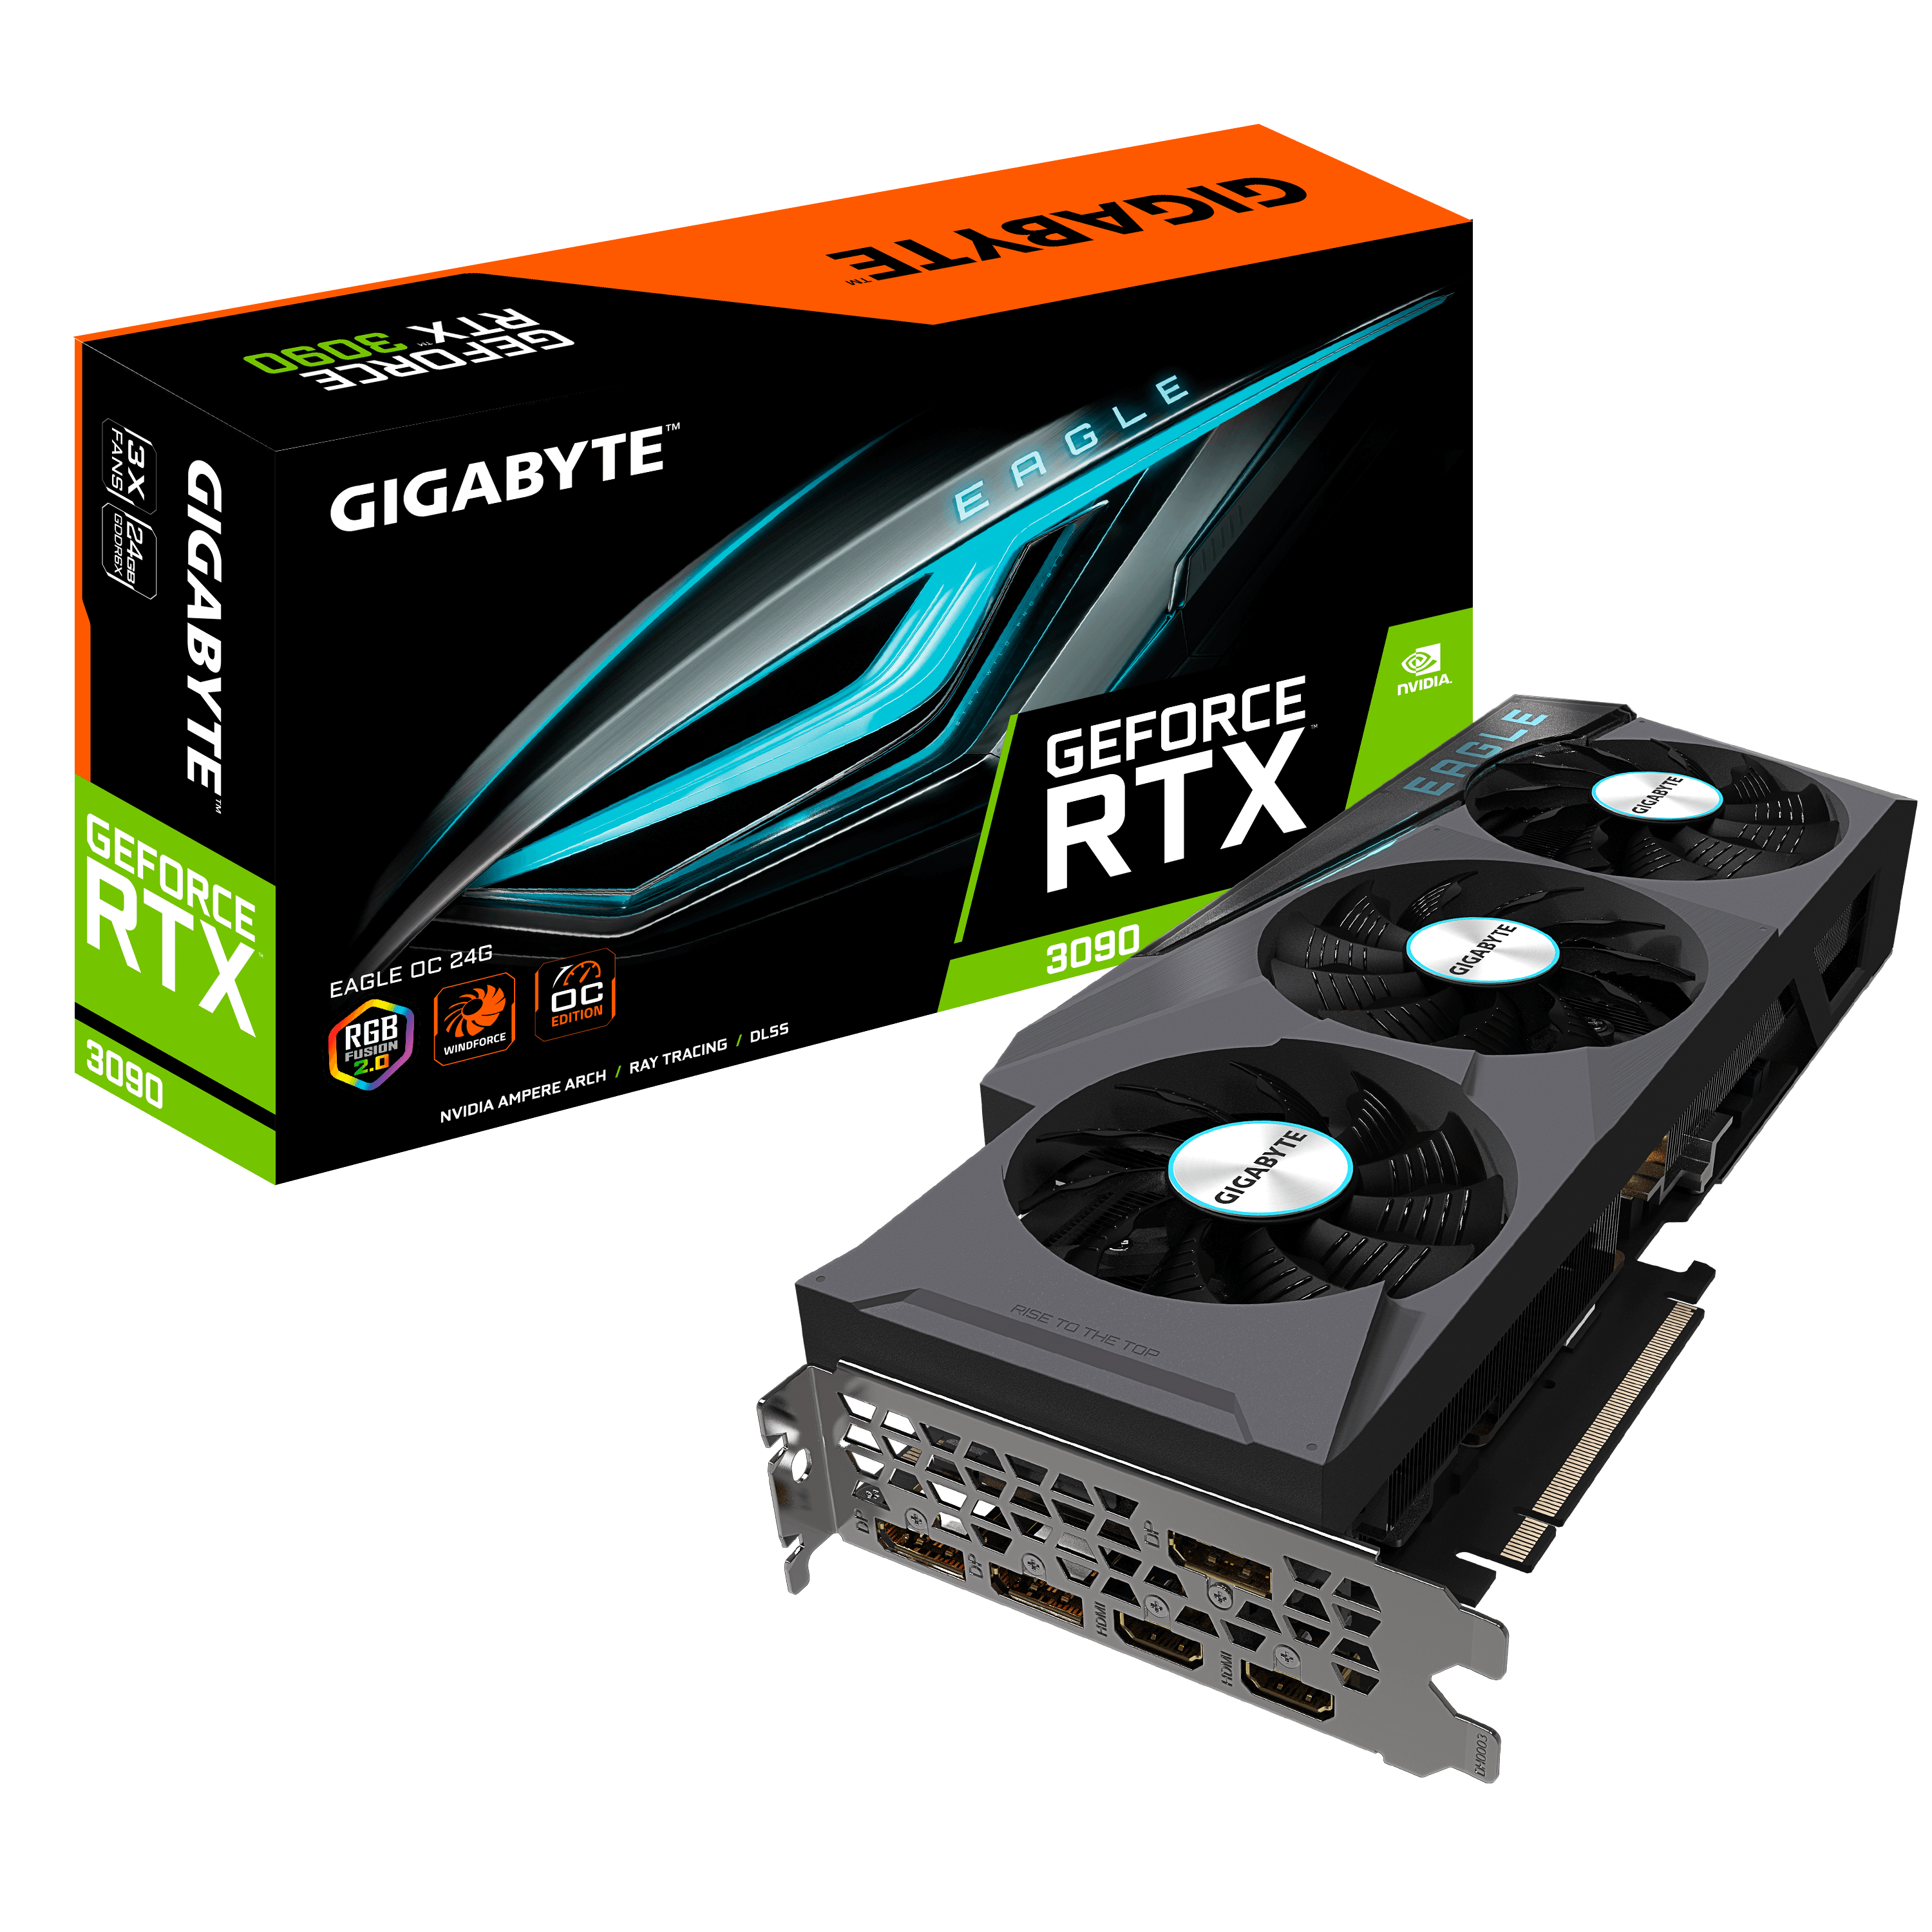 GIGABYTE Releases GeForce RTX™ 30 Series Graphics Cards Einfoldtech